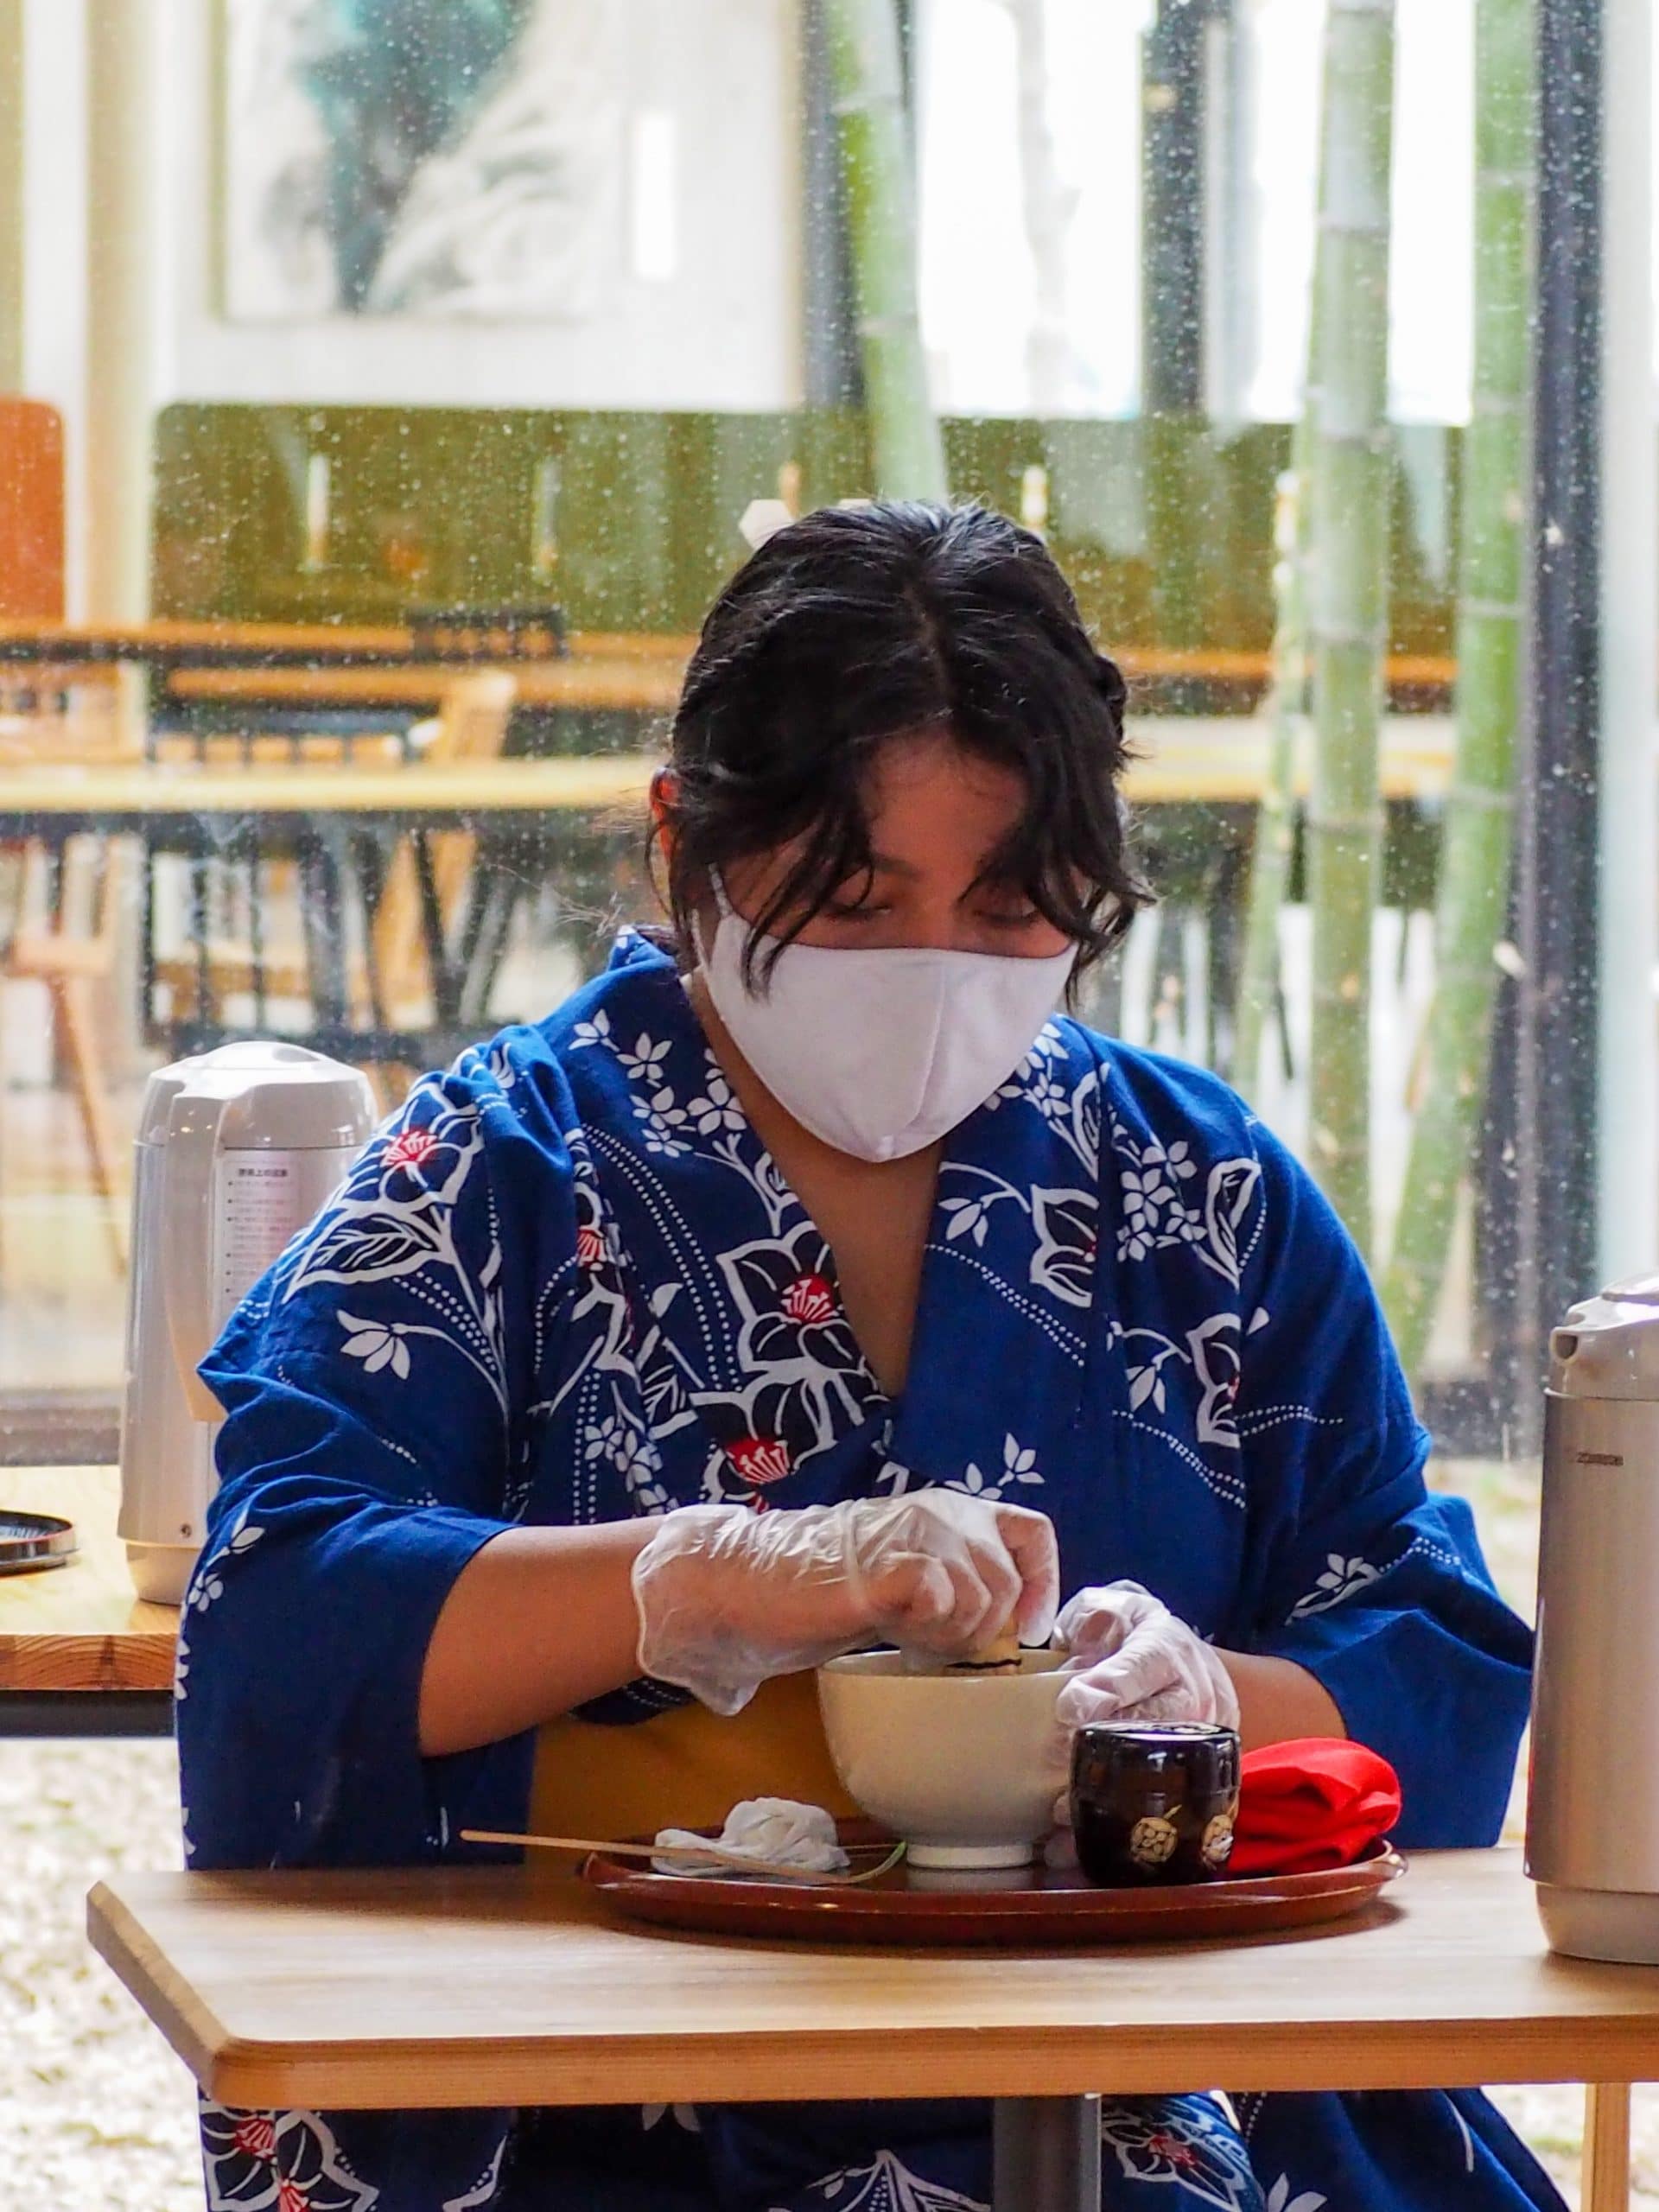 An international student performs tea ceremony in front of an audience